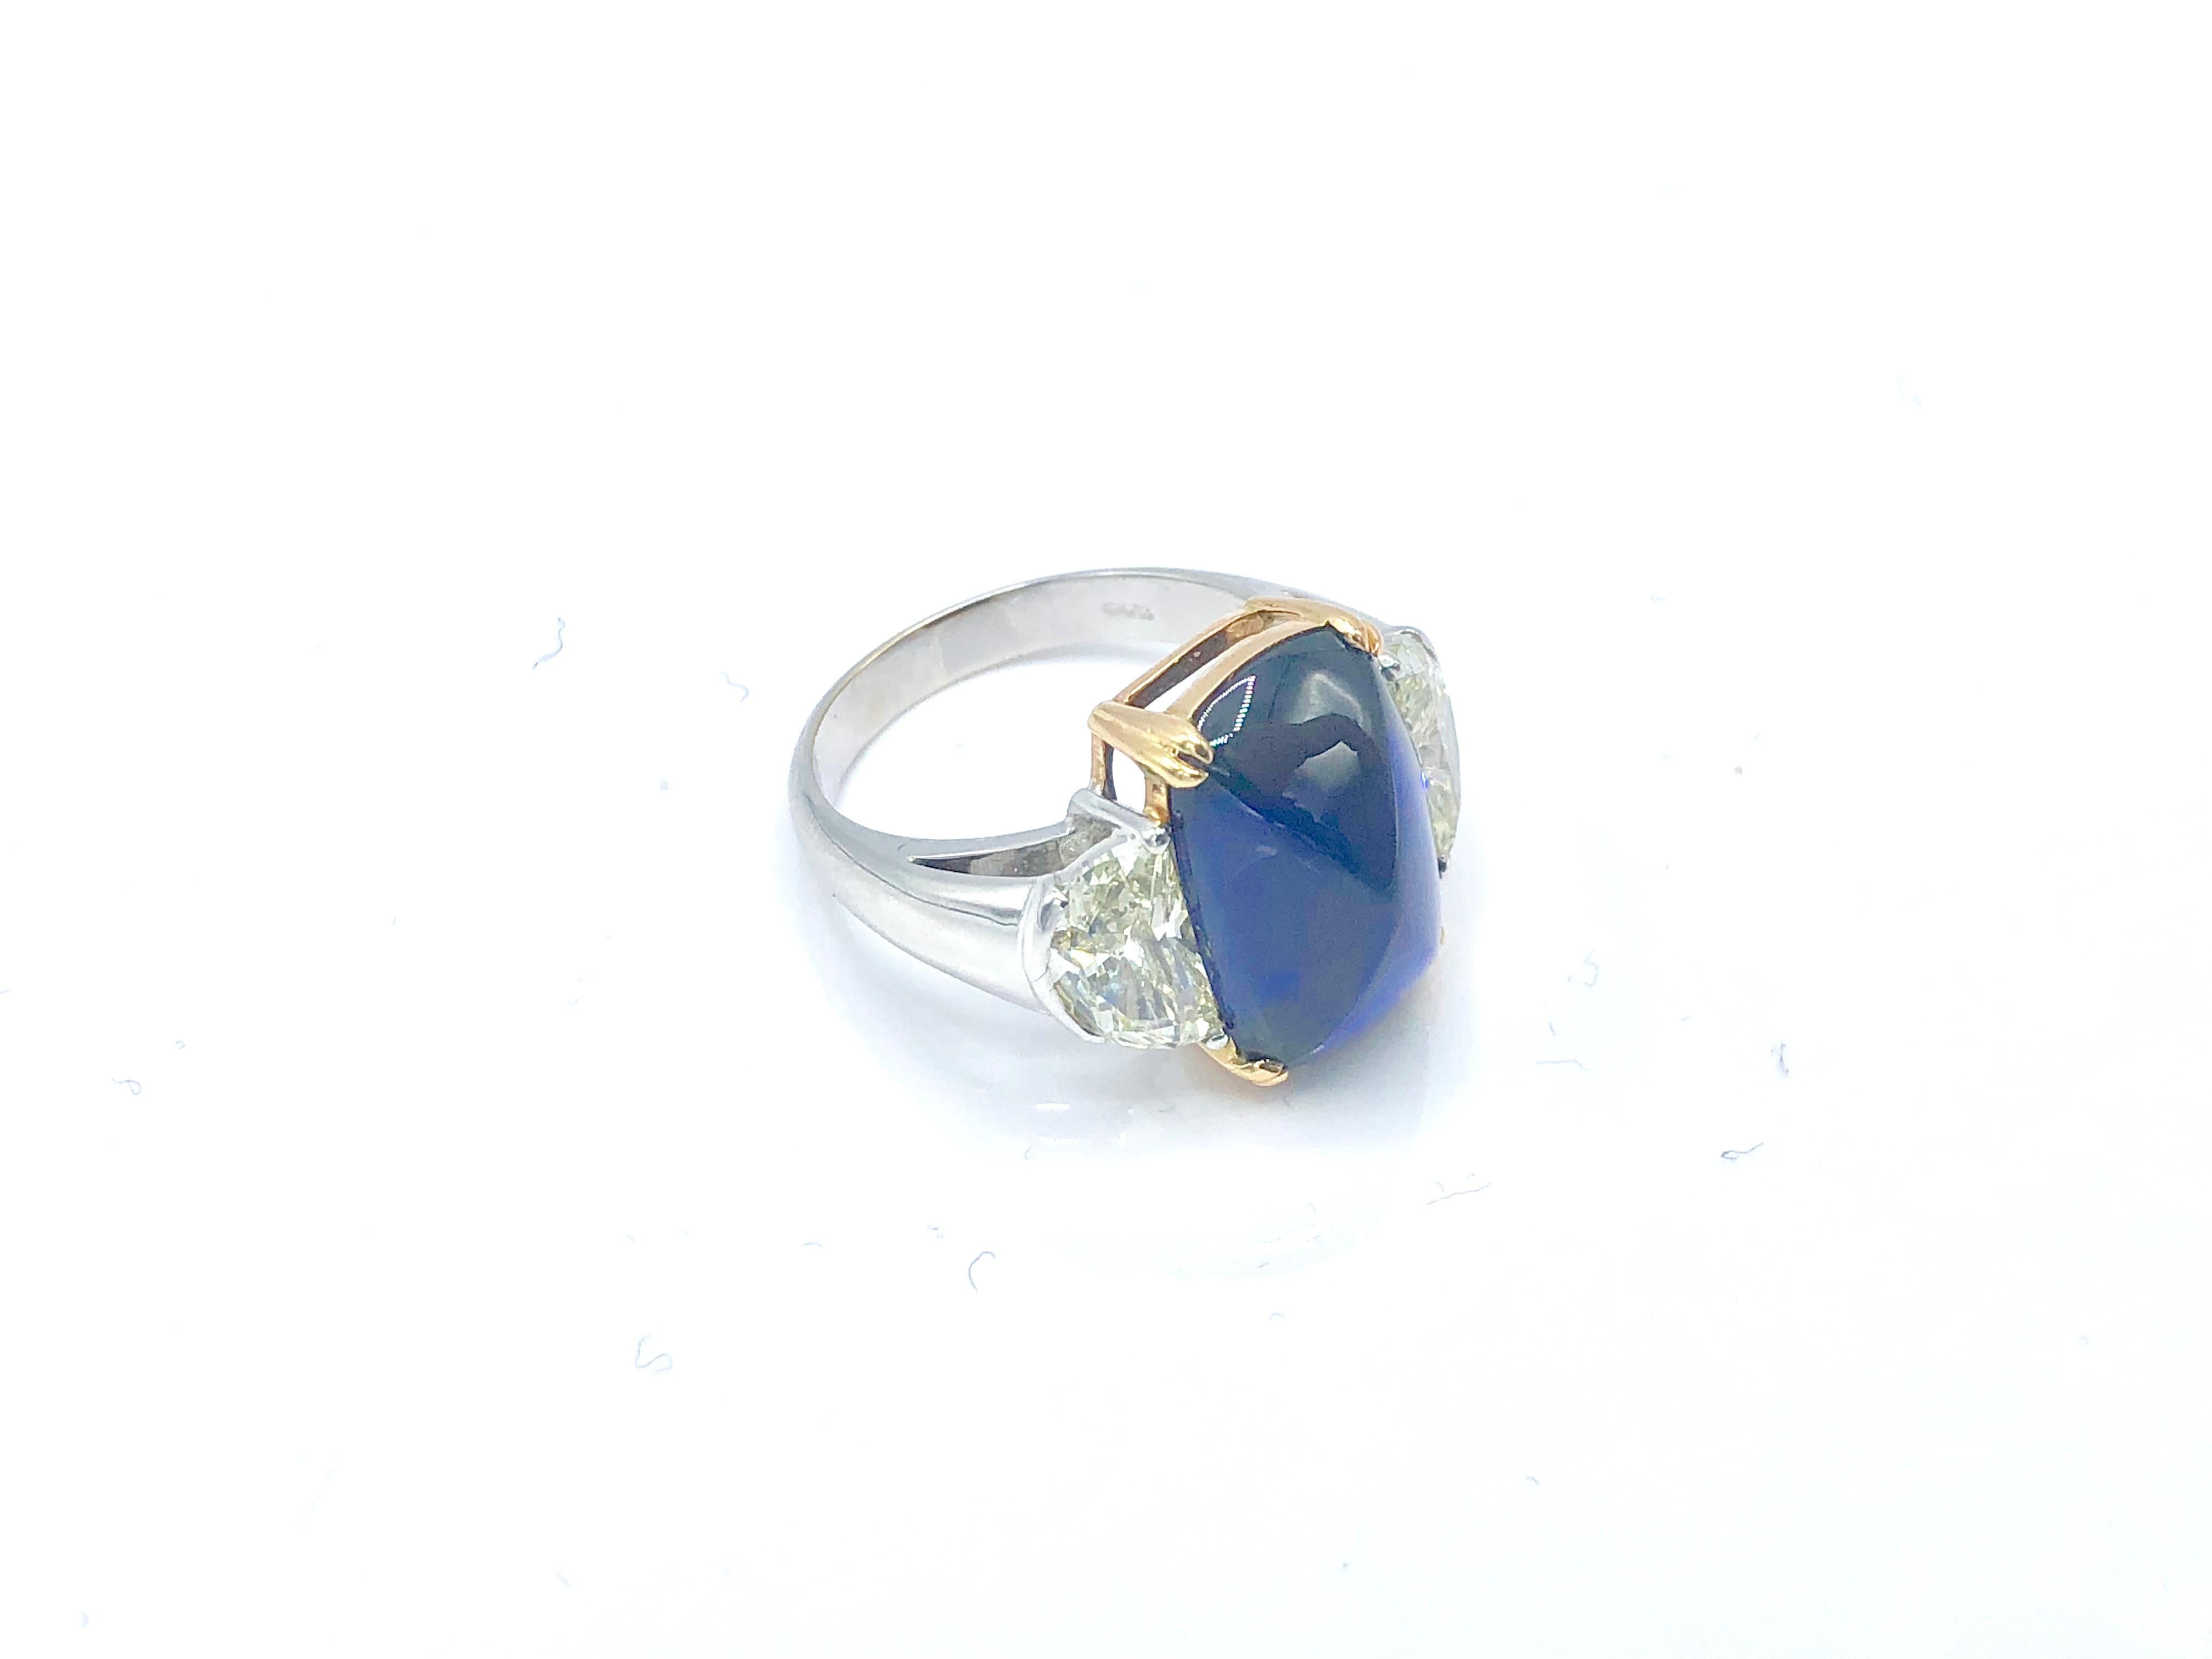 A spectacular ring centered with a Ceylon no heat flat cabochon sapphire in between two halfmoon diamonds.

Sapphire: 9.41 ct 
Diamonds: 2.03

Size: US 6 3/4